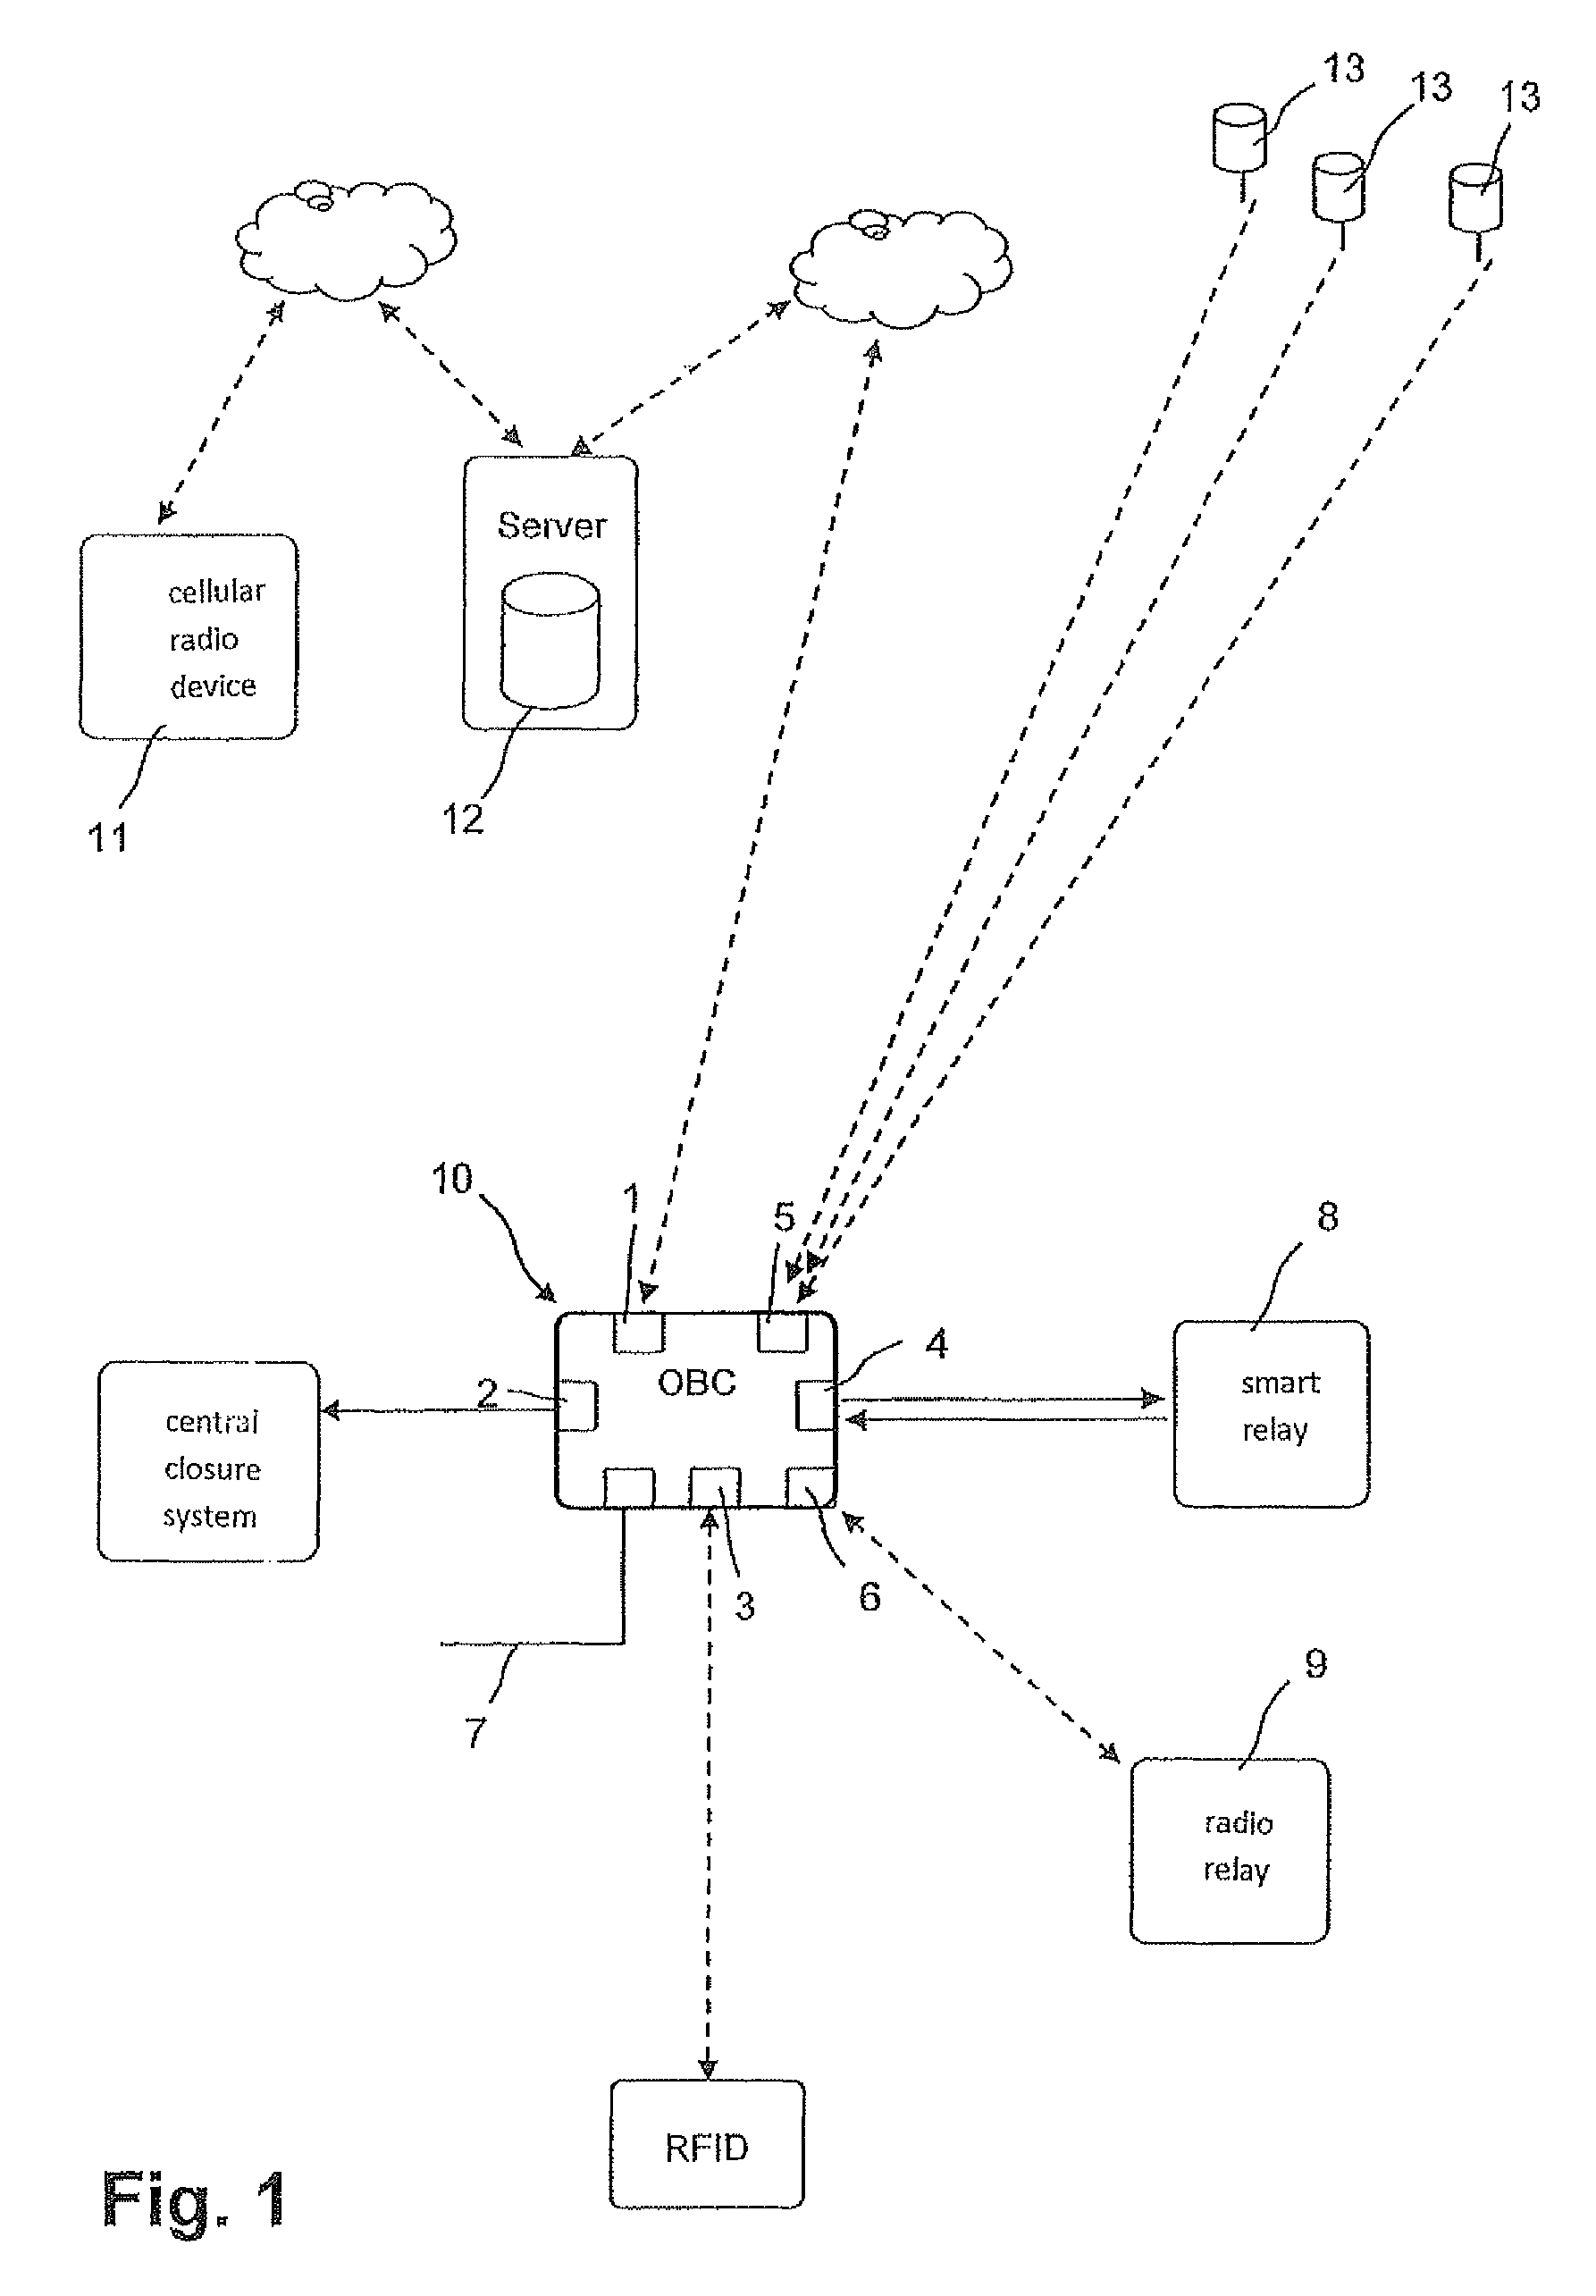 Mobile-radio-based additional electronic immobilizer having a door opener having a theft alarm